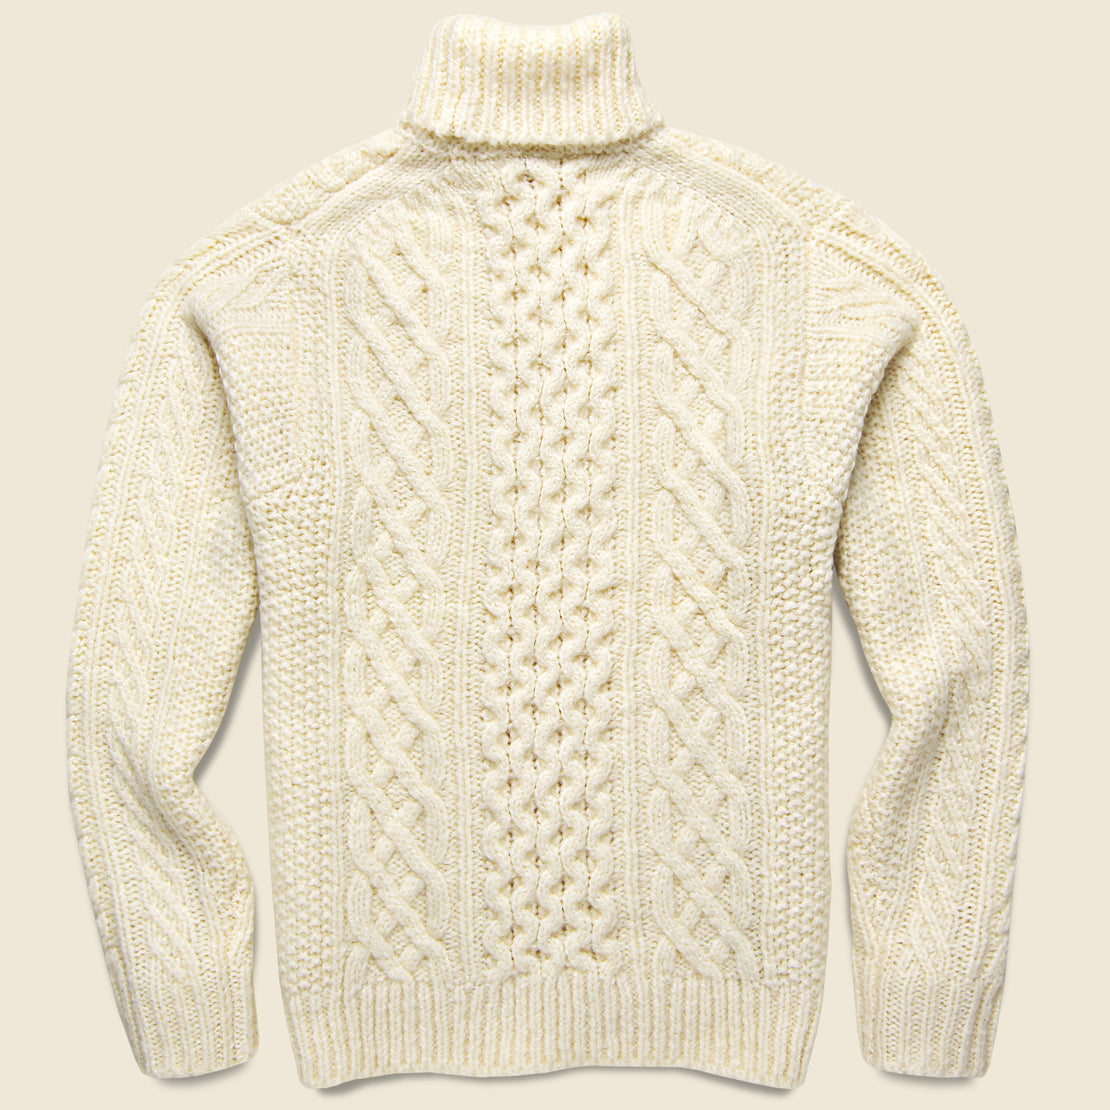 Fisherman Cable Turtleneck - Ivory - Alex Mill - STAG Provisions - Tops - Sweater